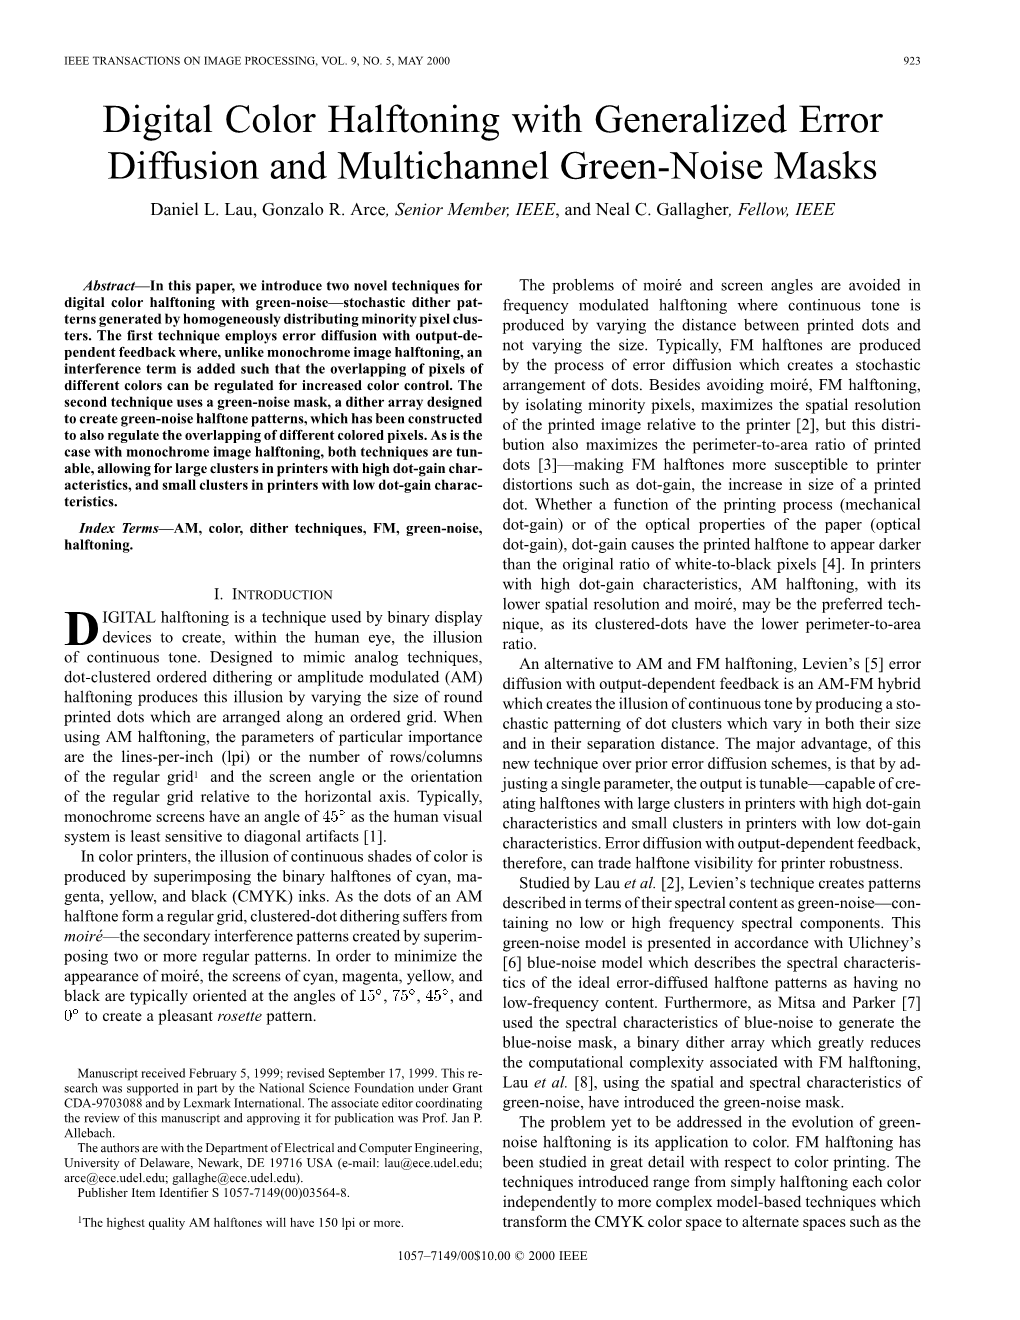 Digital Color Halftoning with Generalized Error Diffusion and Multichannel Green-Noise Masks Daniel L